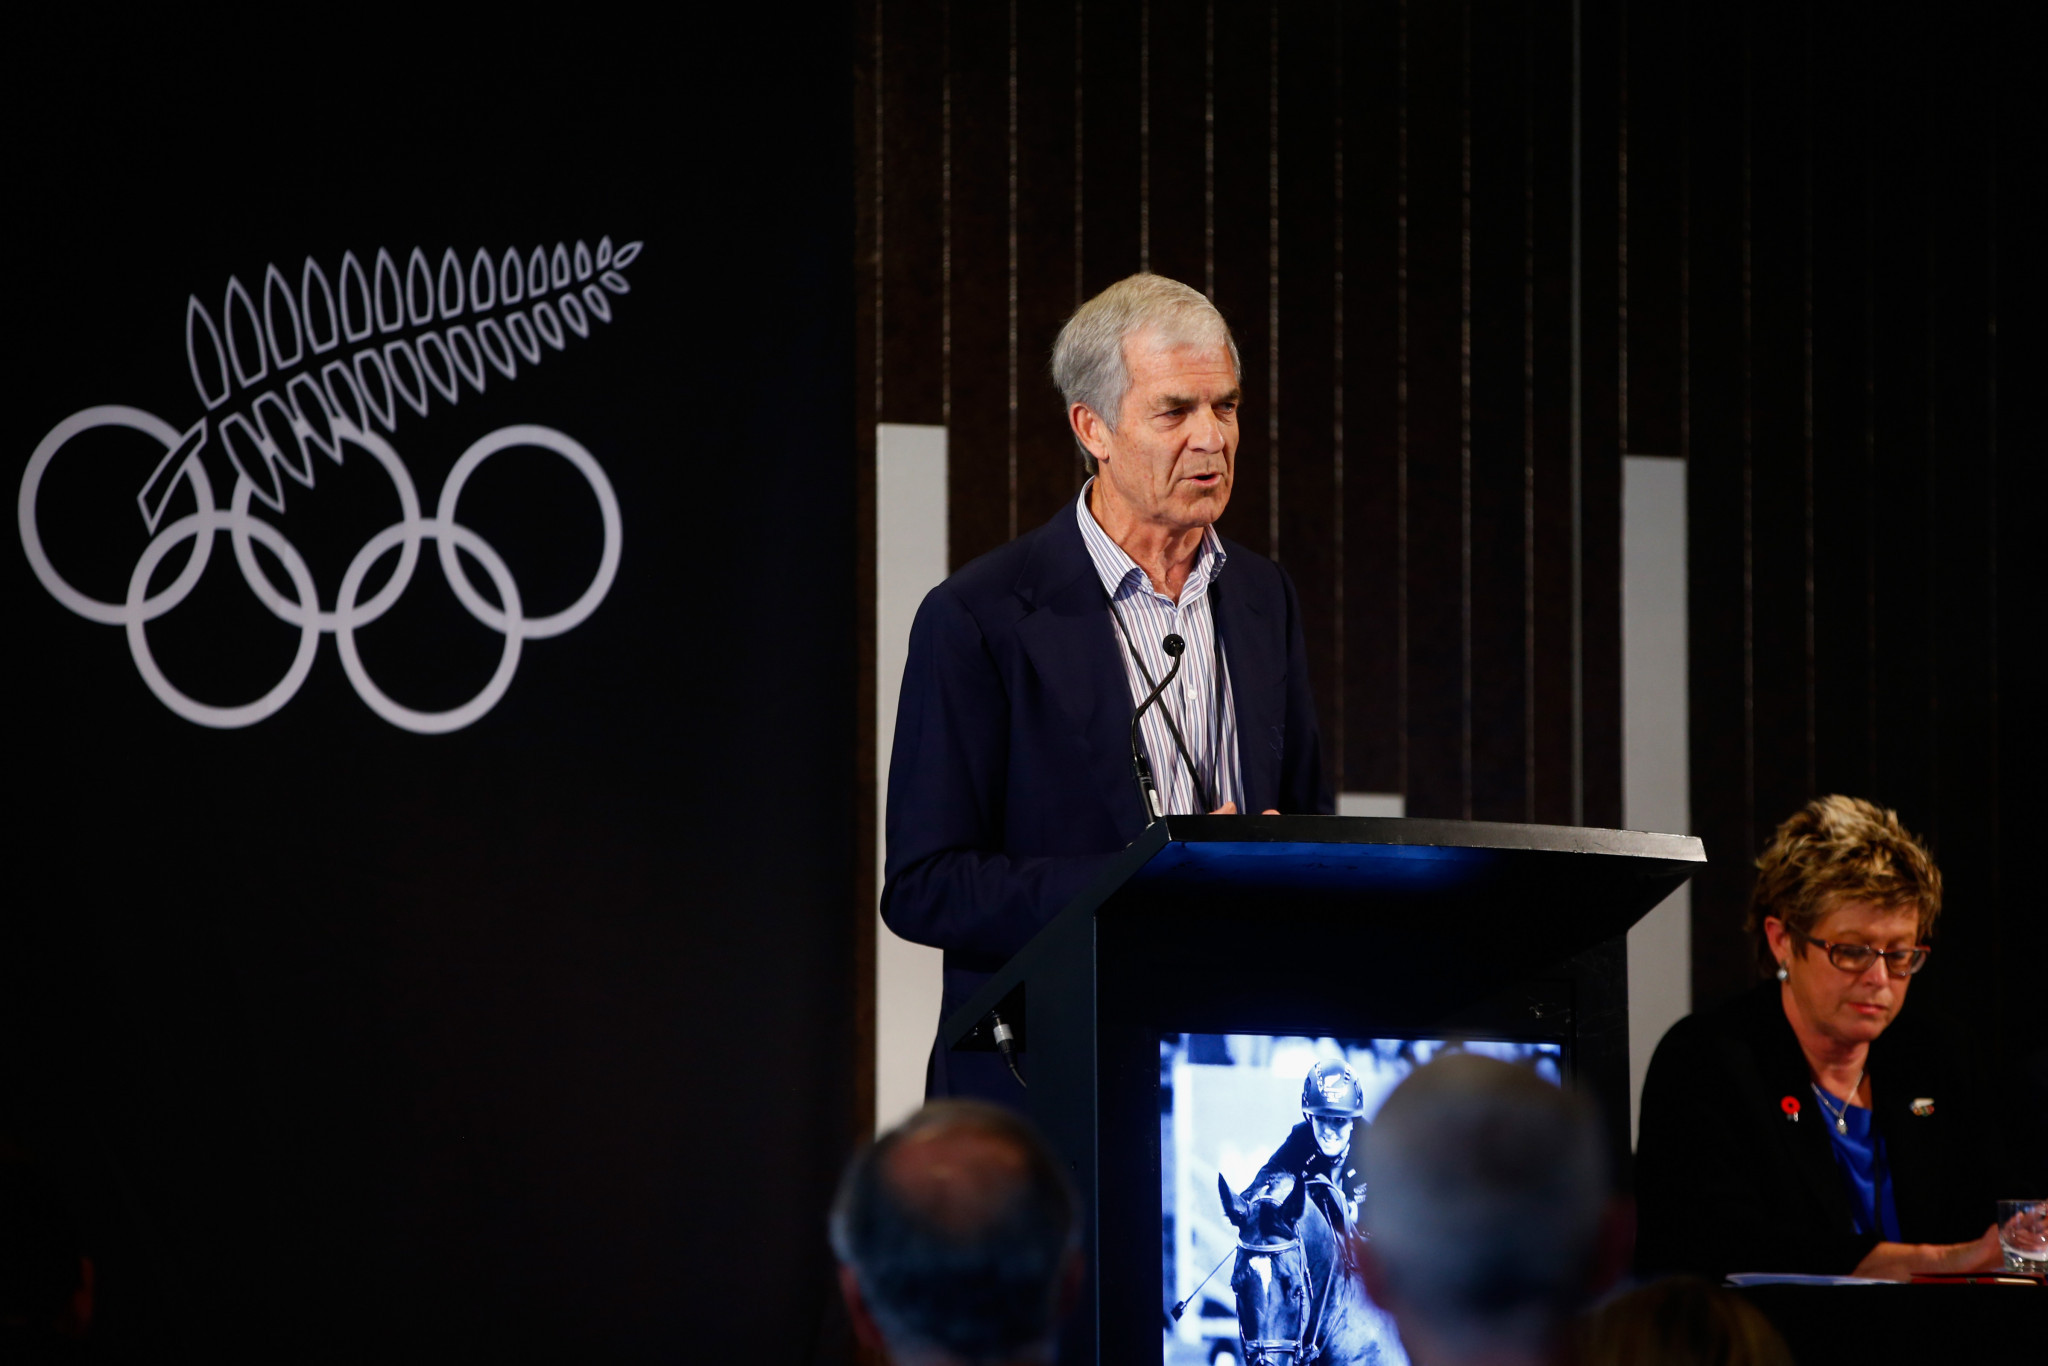 Barry Maister's term on the IOC concluded at the end of last year after he reached the age limit ©Getty Images